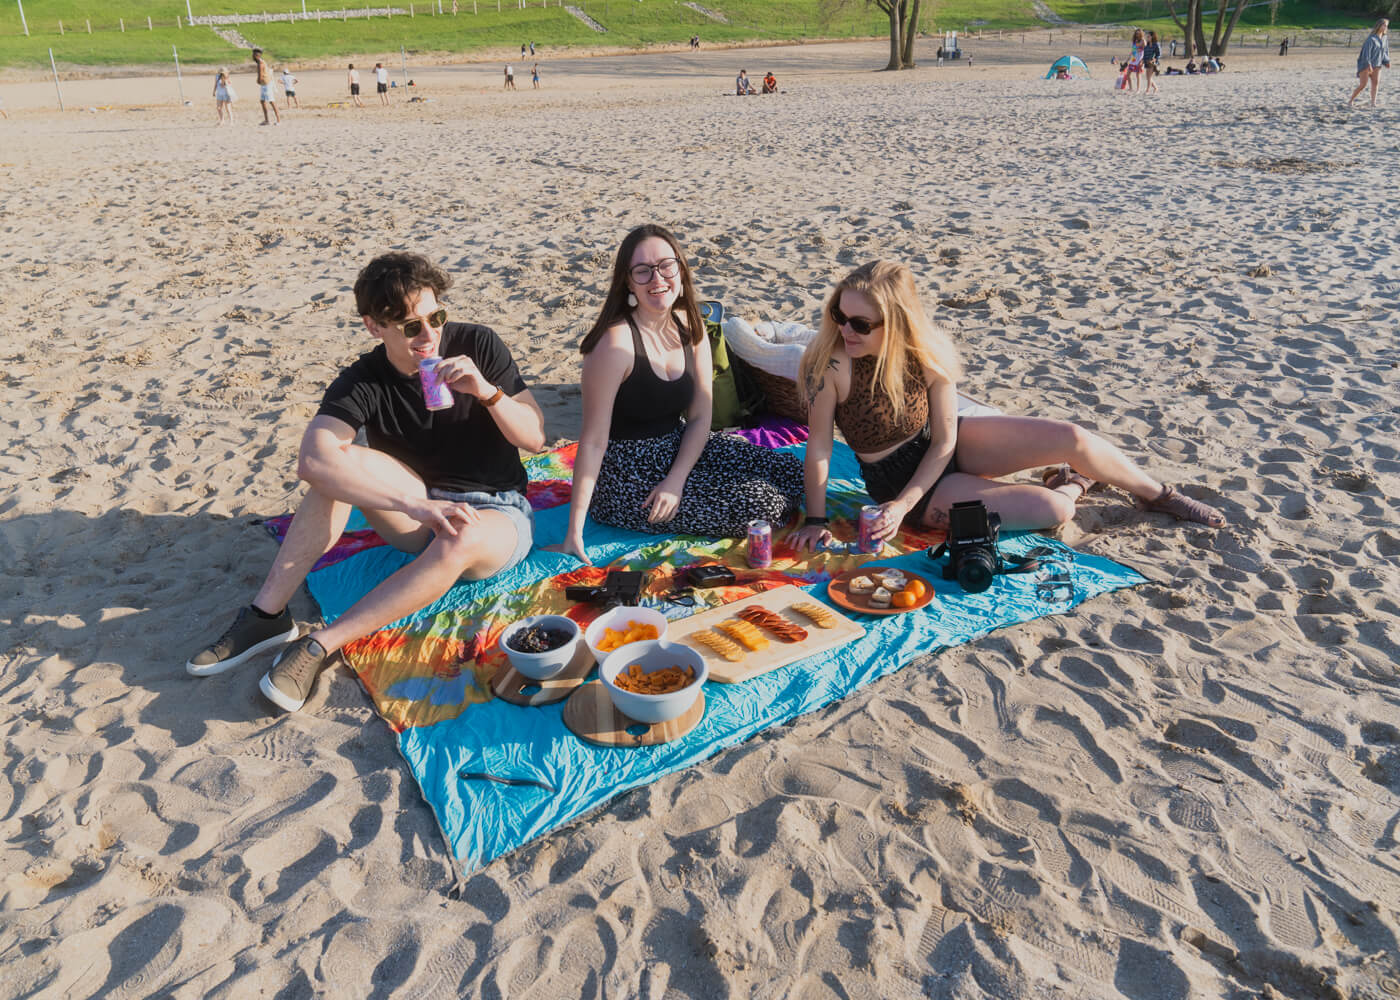 Three people sit on an Islander Blanket at a beach and share a picnic